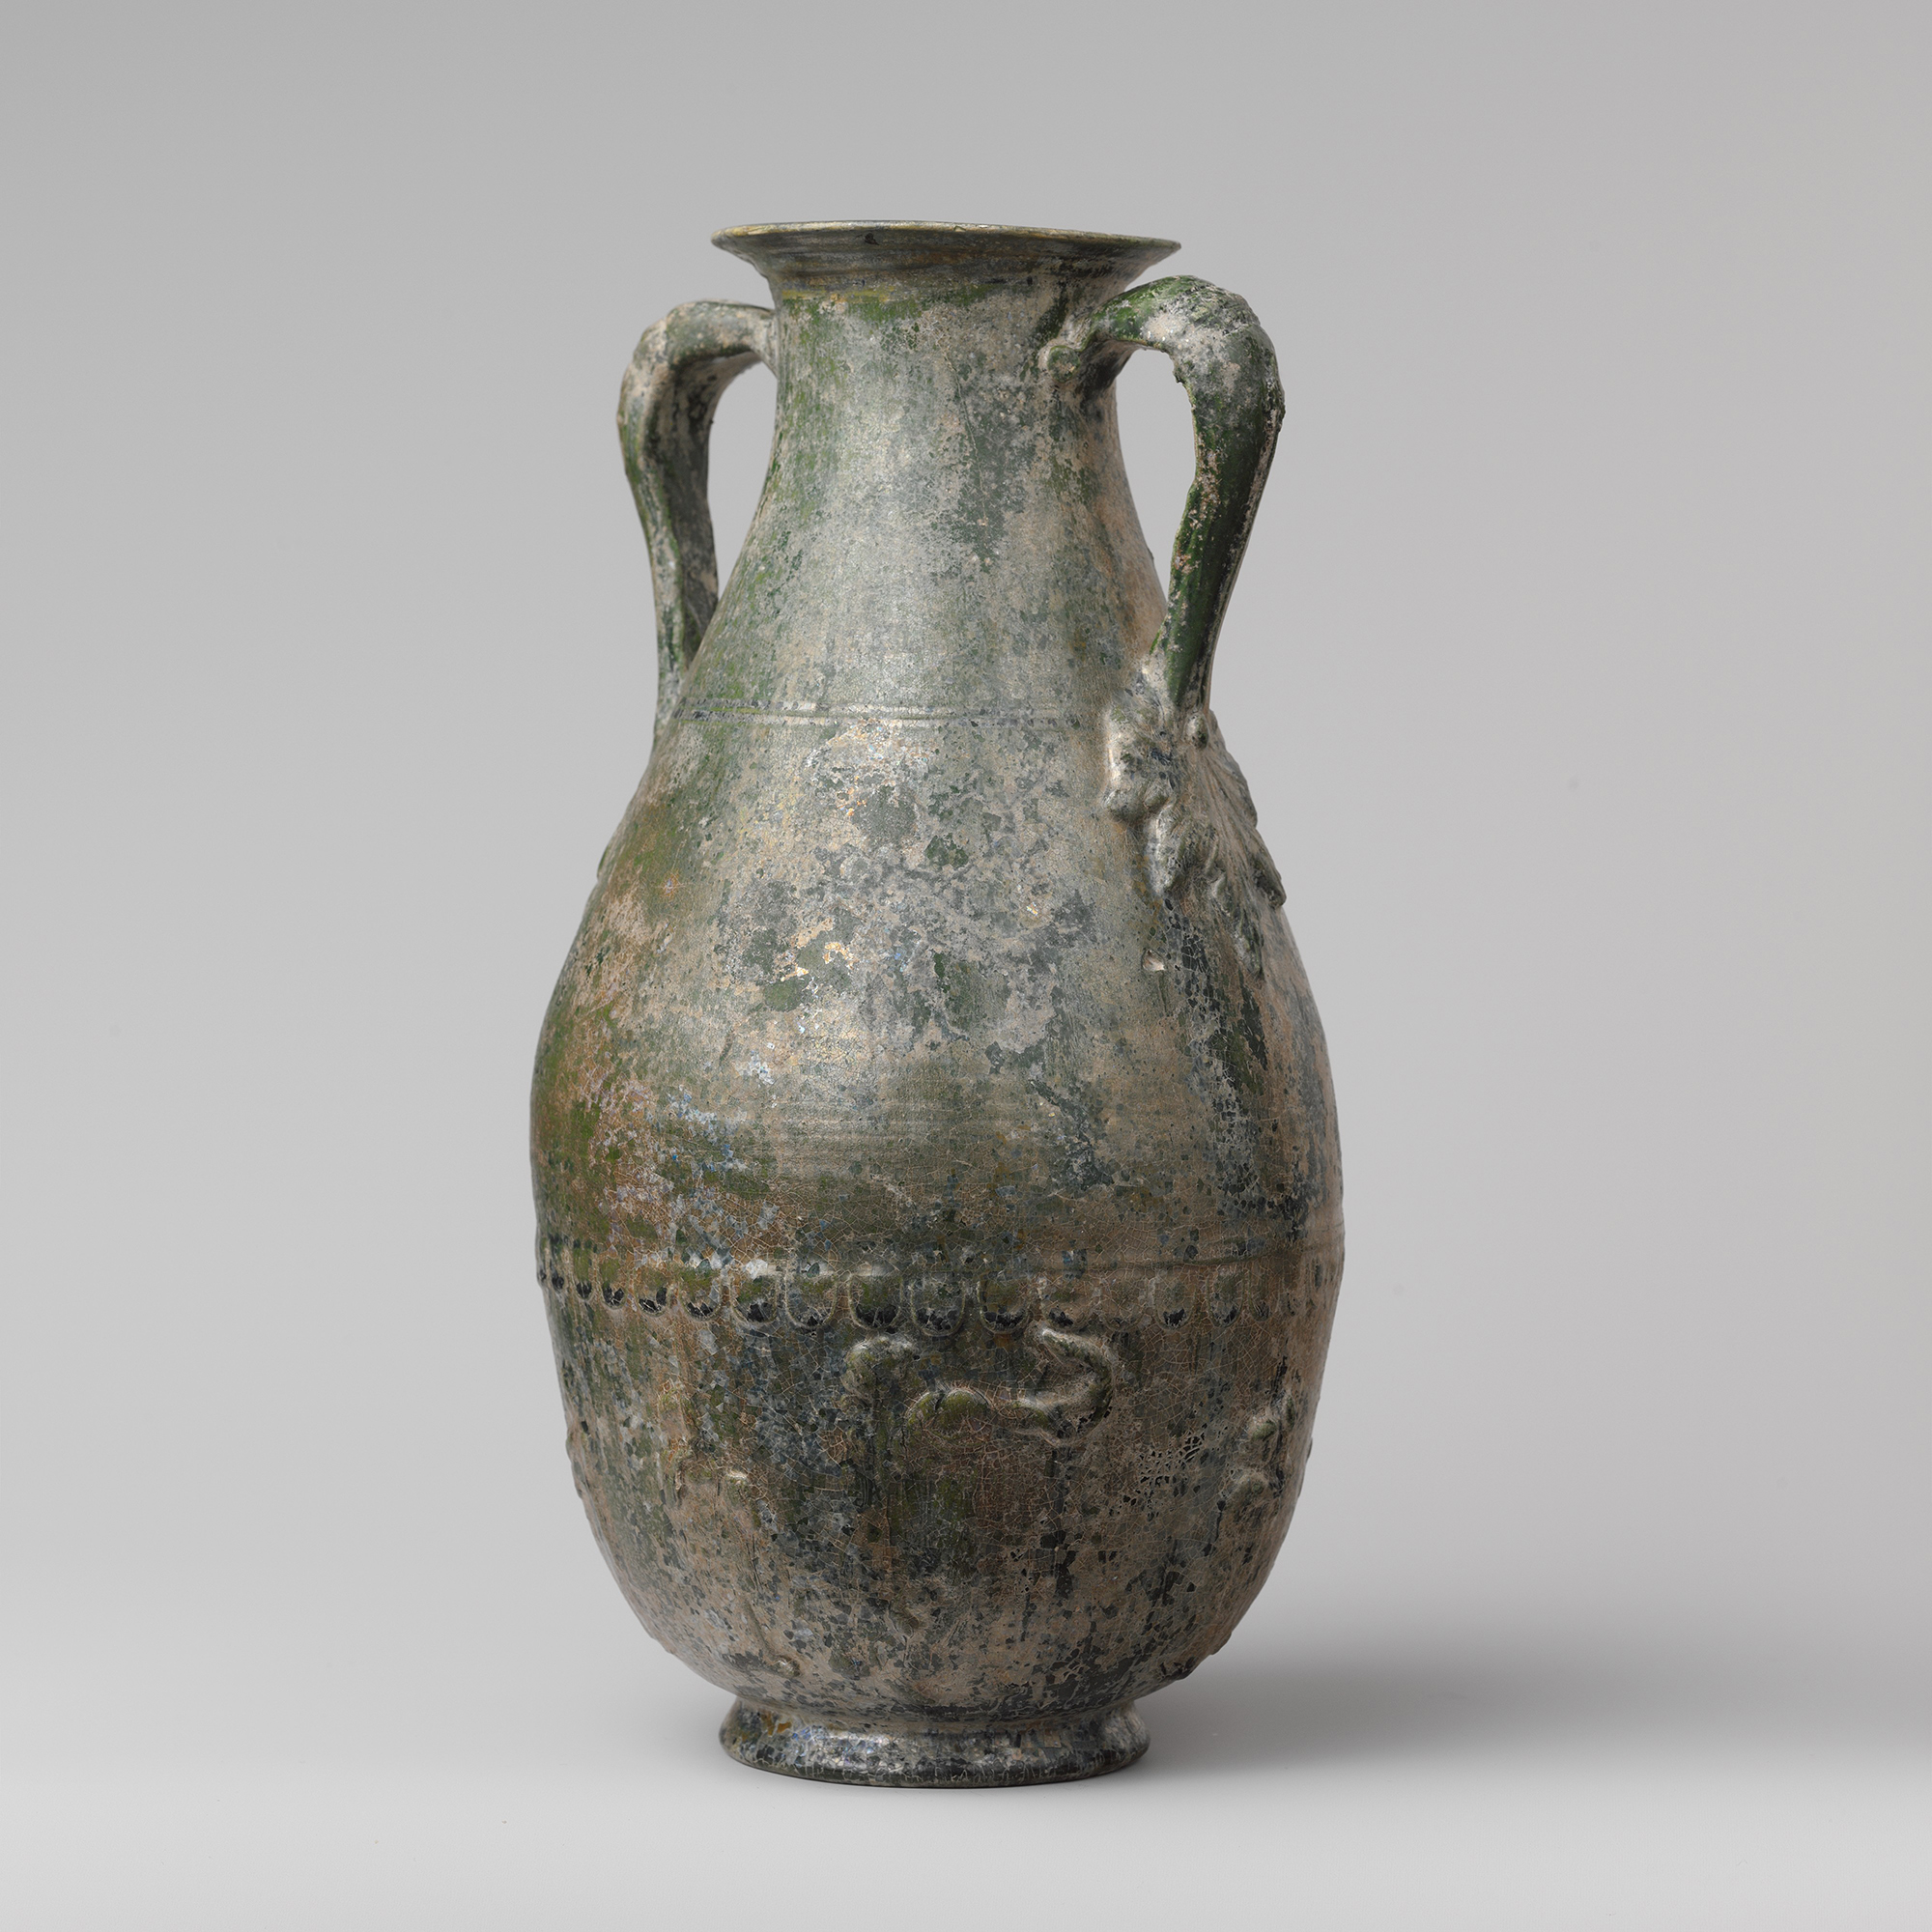 Distressed Slate Colored Terracotta Amphora (jar) from the Roman Period, 1st Century A.D.